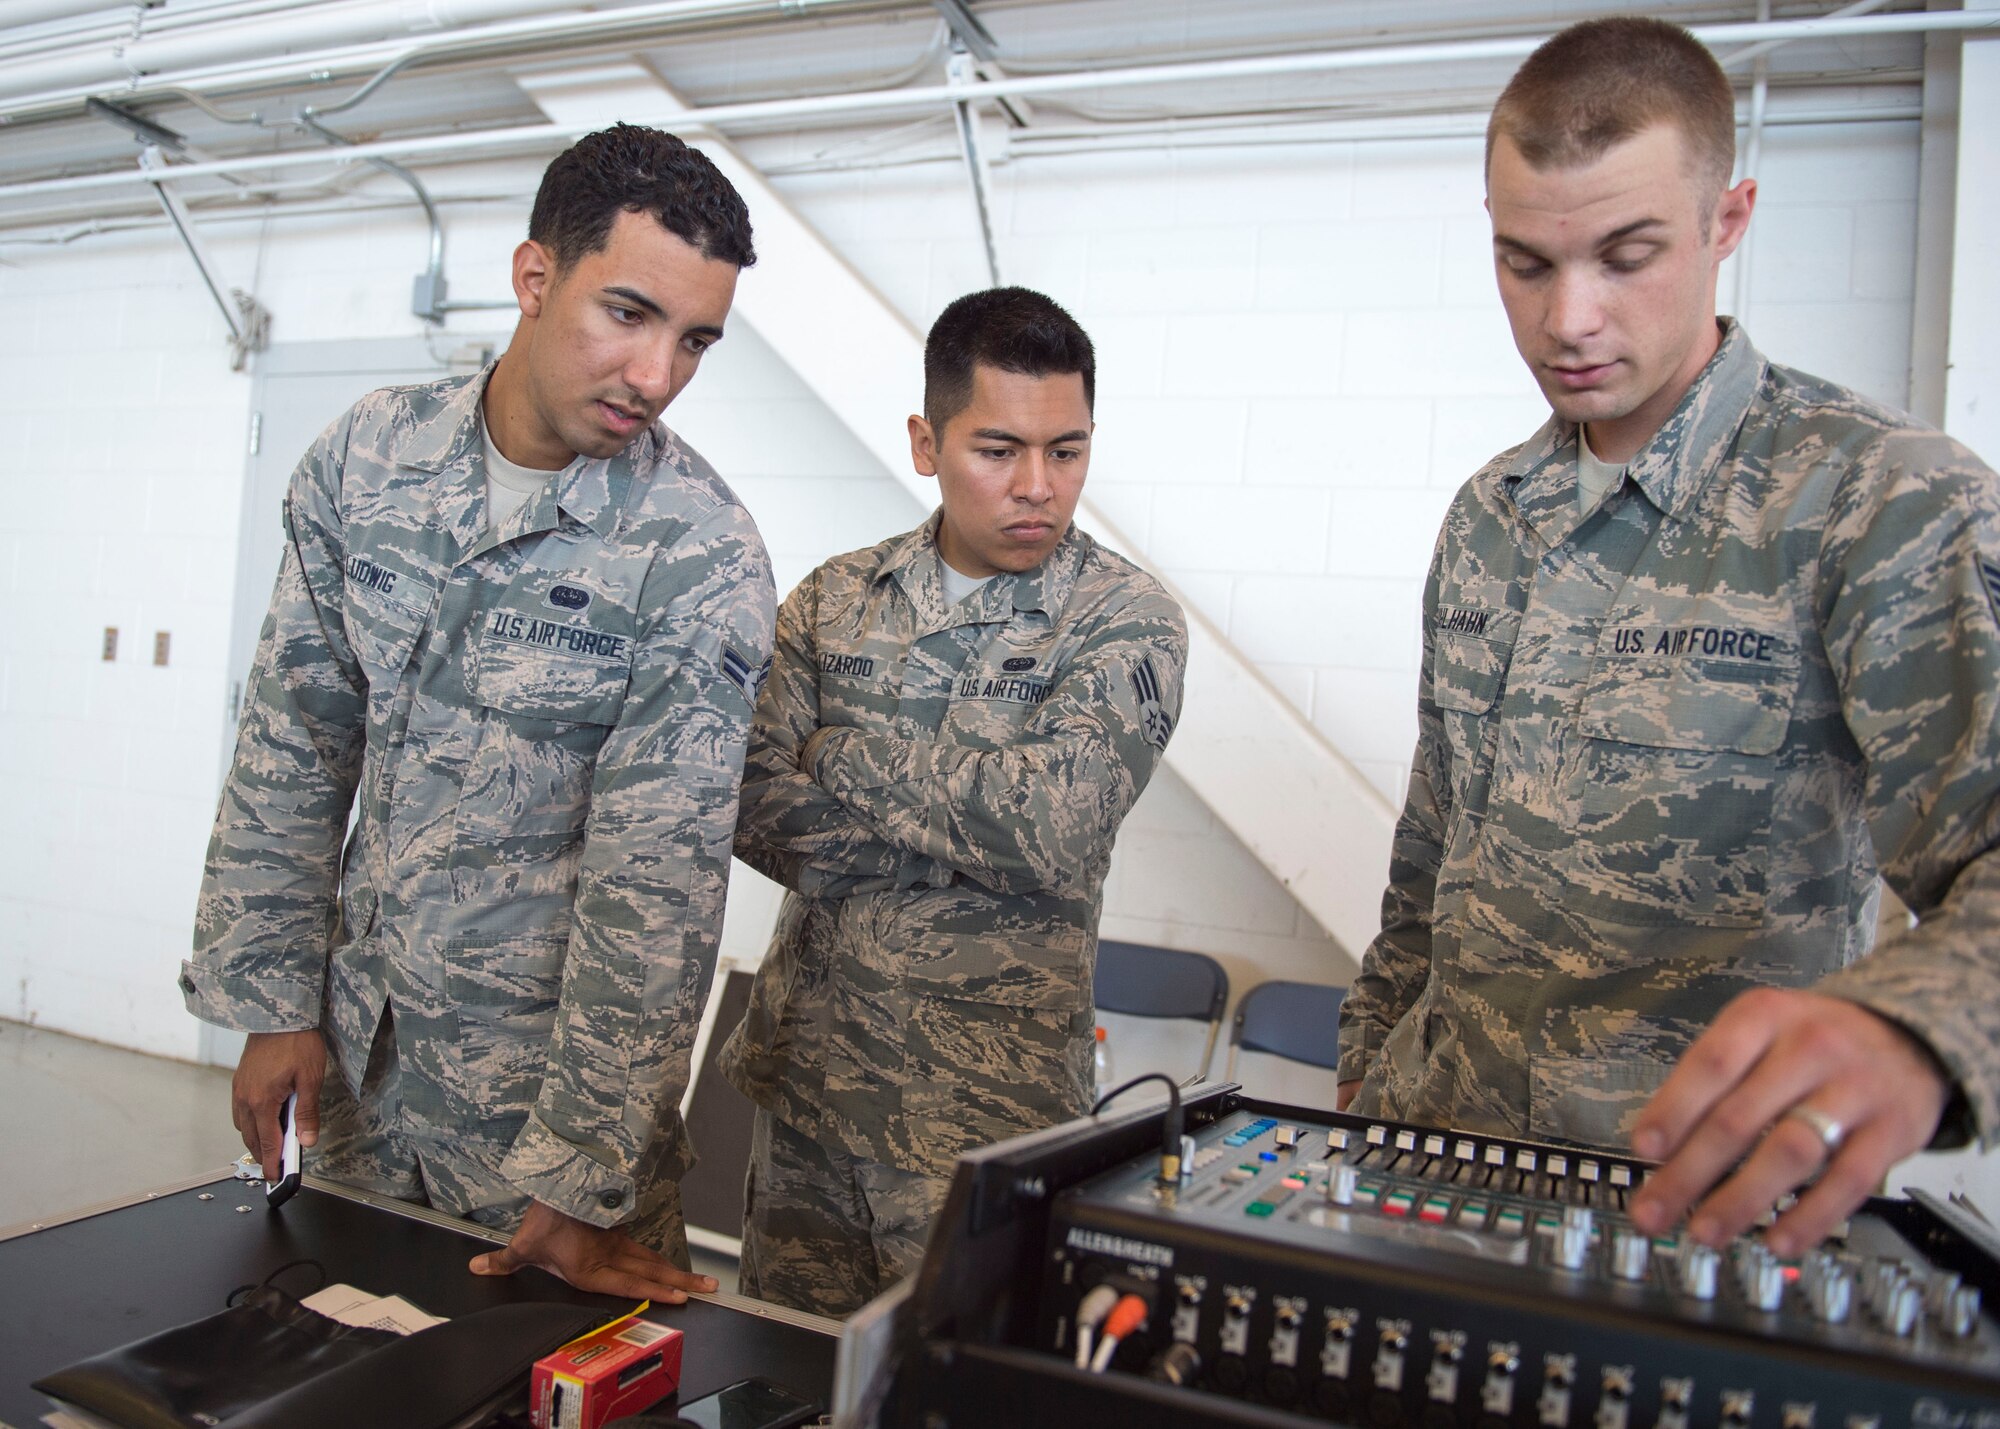 Airman 1st Class Sean Ludwig, left, Senior Airman Roy Lizardo, middle, and Staff Sgt. Andrew Muhlhahn, right, radio frequency systems technicians with the 1st Special Operations Communications Squadron, check a sound production mixer prior to a change of command ceremony at the Freedom Hangar on Hurlburt Field, Fla., July 15, 2016. Combined, these Airmen have provided audio production for more than 50 events in 2016. (U.S. Air Force photo by Senior Airman Krystal M. Garrett) 